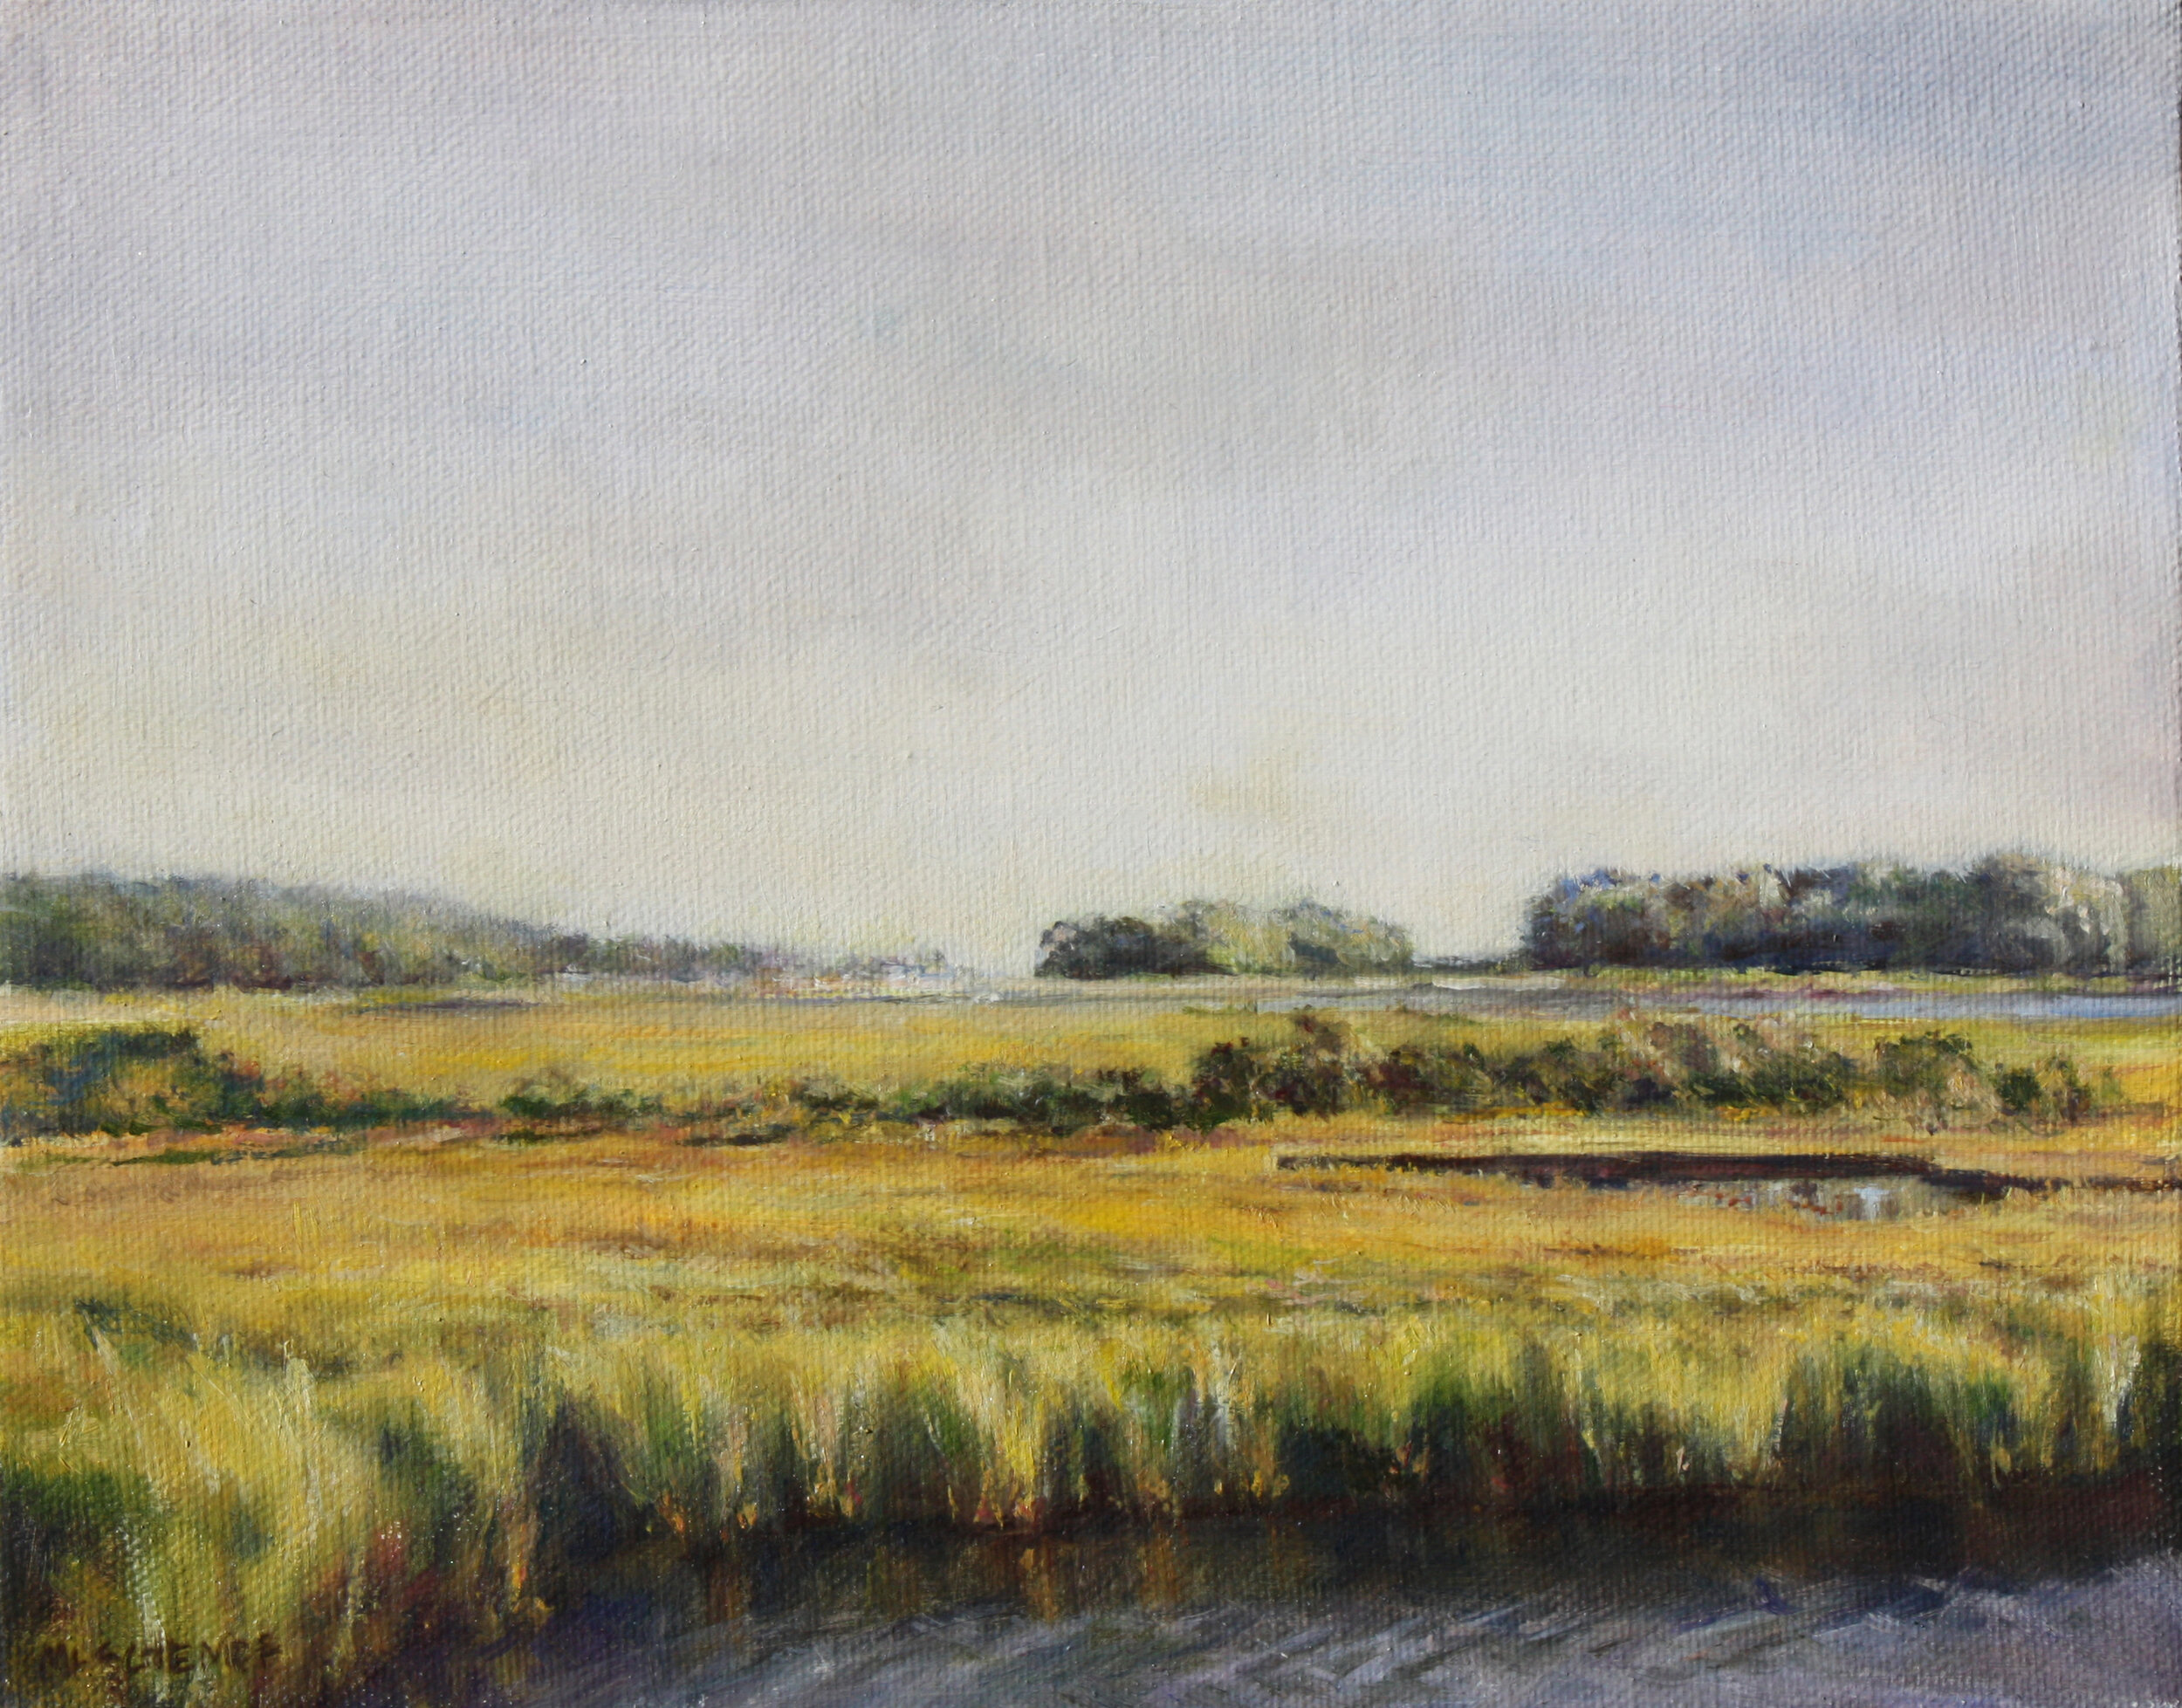  Mary Lou Schempf  Yellow Marsh,  8” x 10”, oil on canvas   (private collection)  